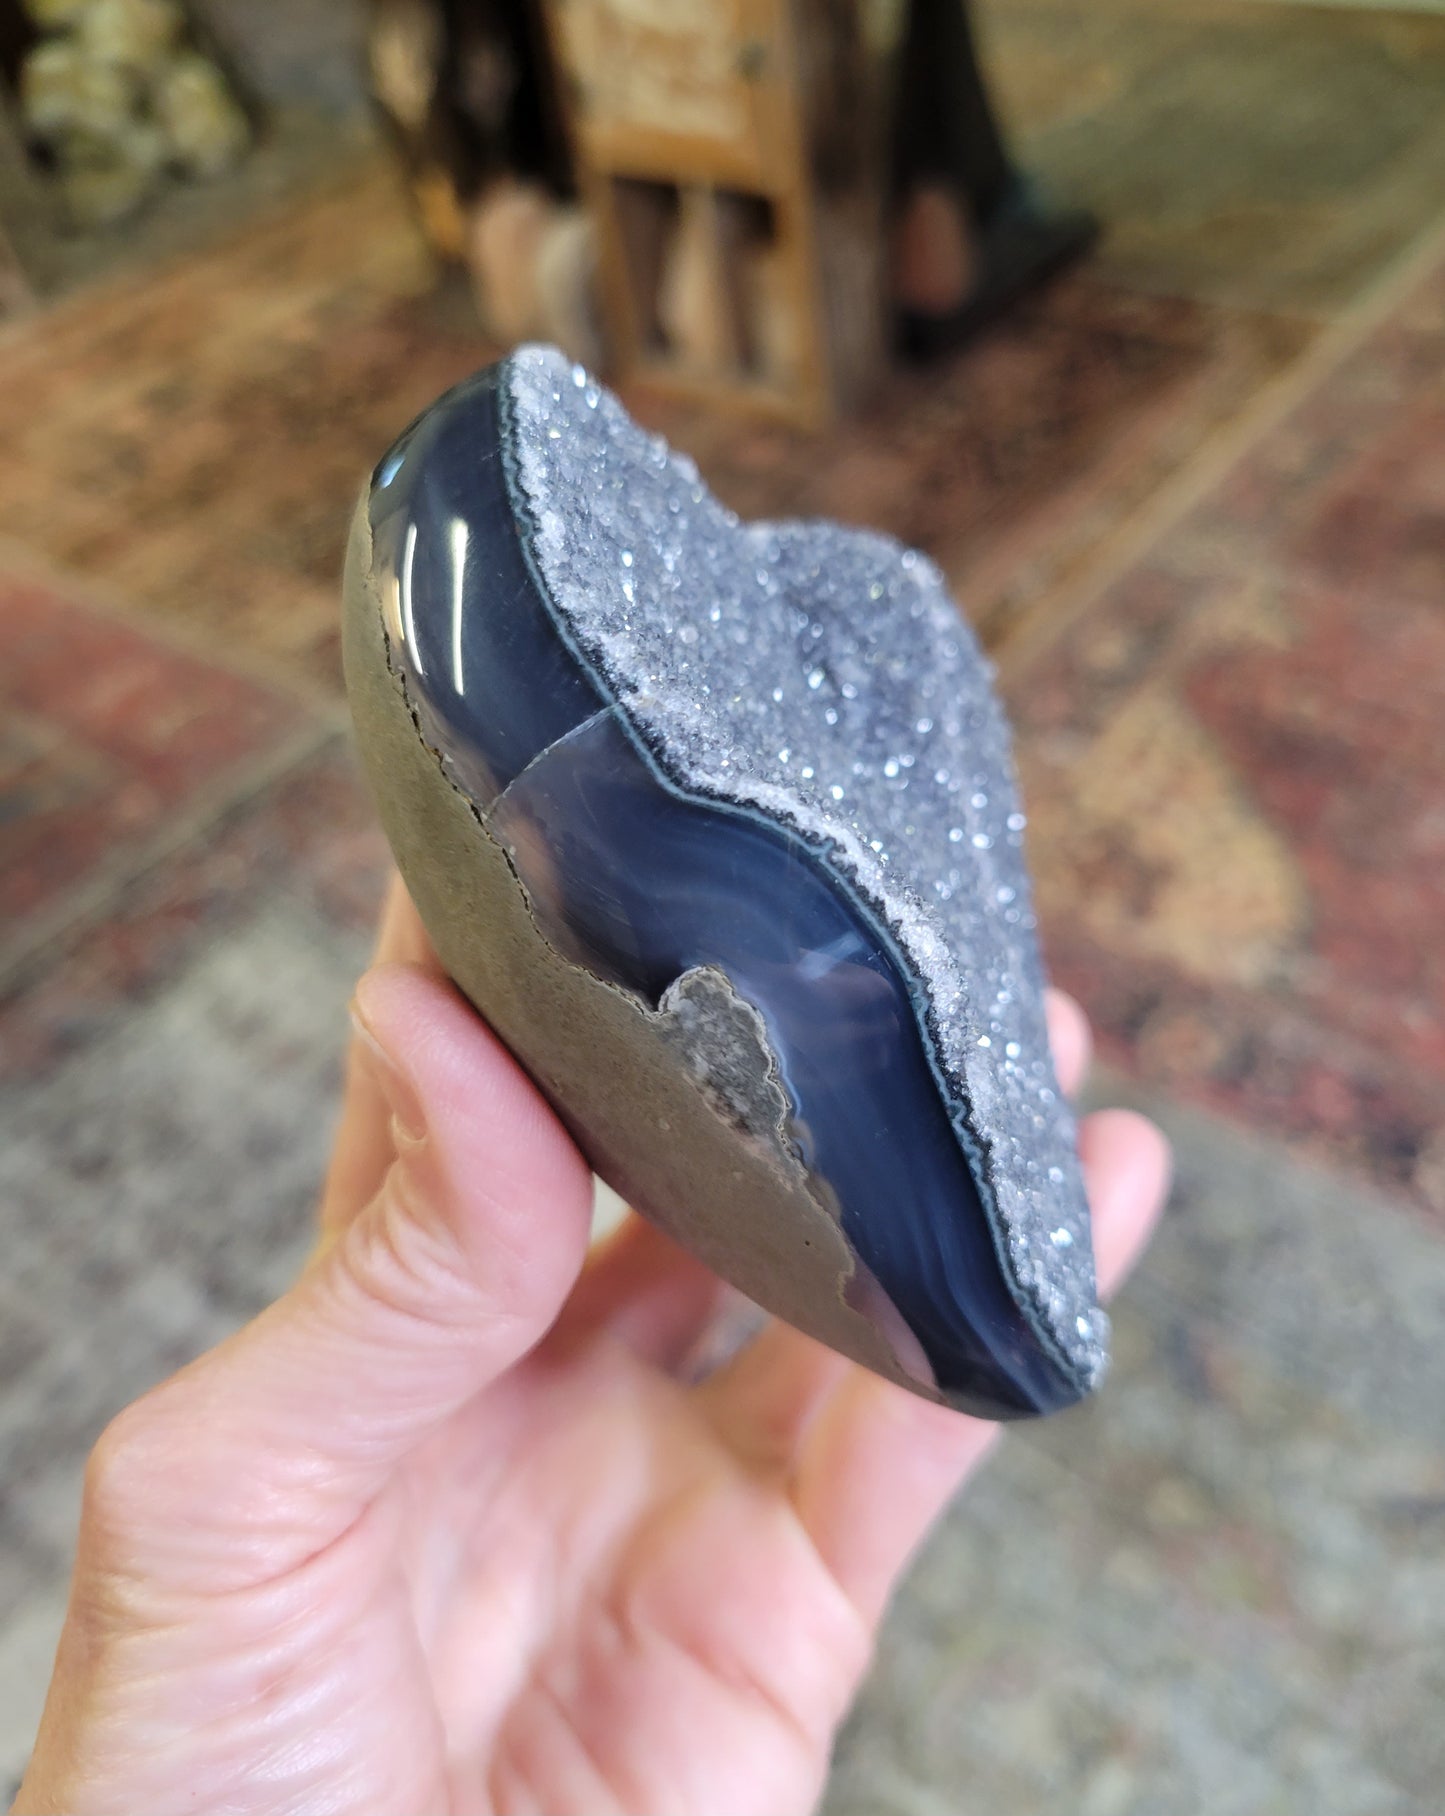 Black Amethyst and Agate Heart from Brazil